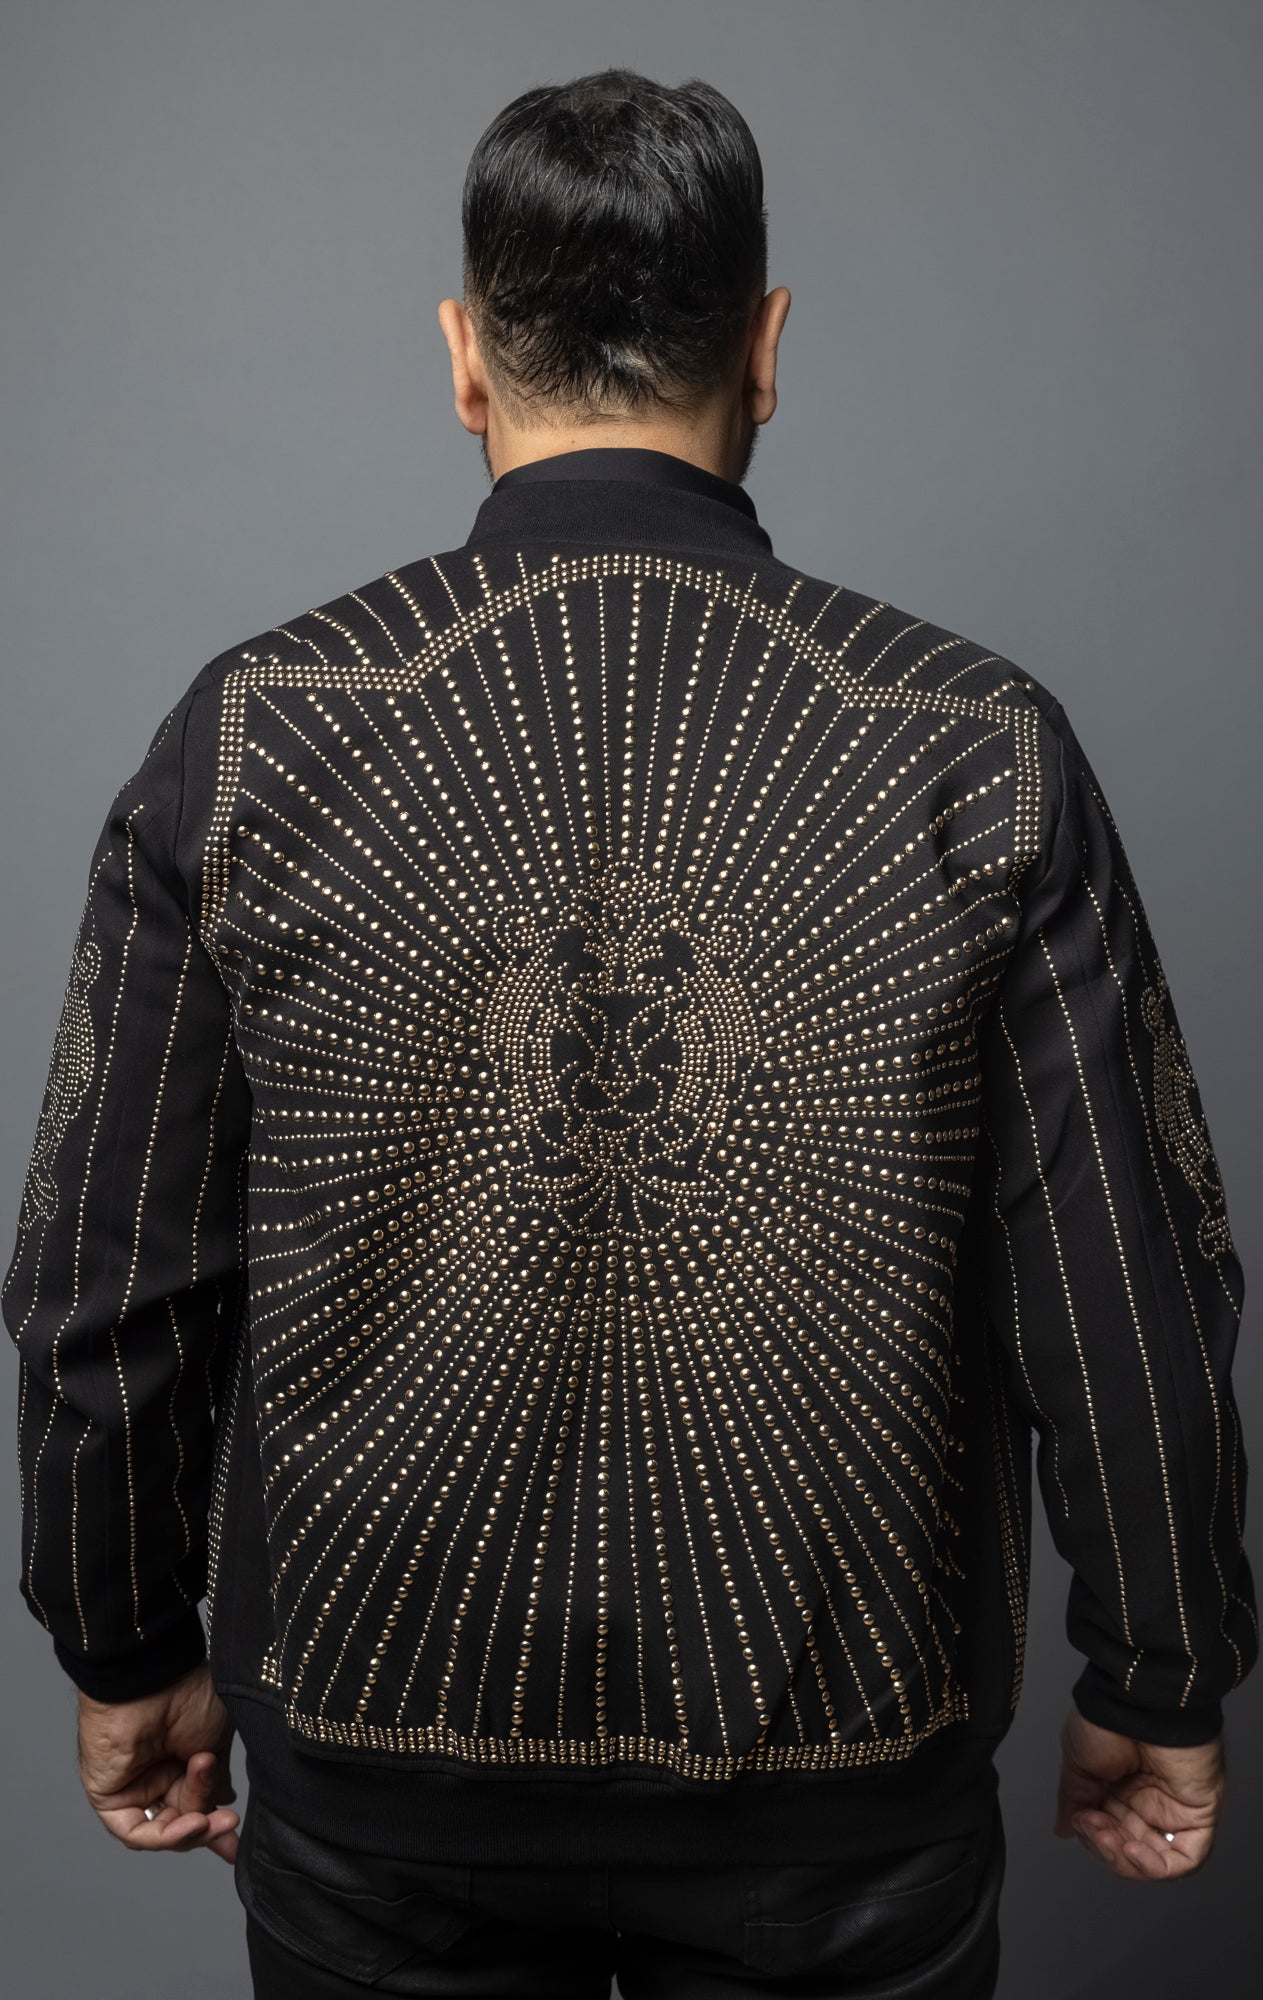 omber jacket with geometric lion studs and striped ribbed design.